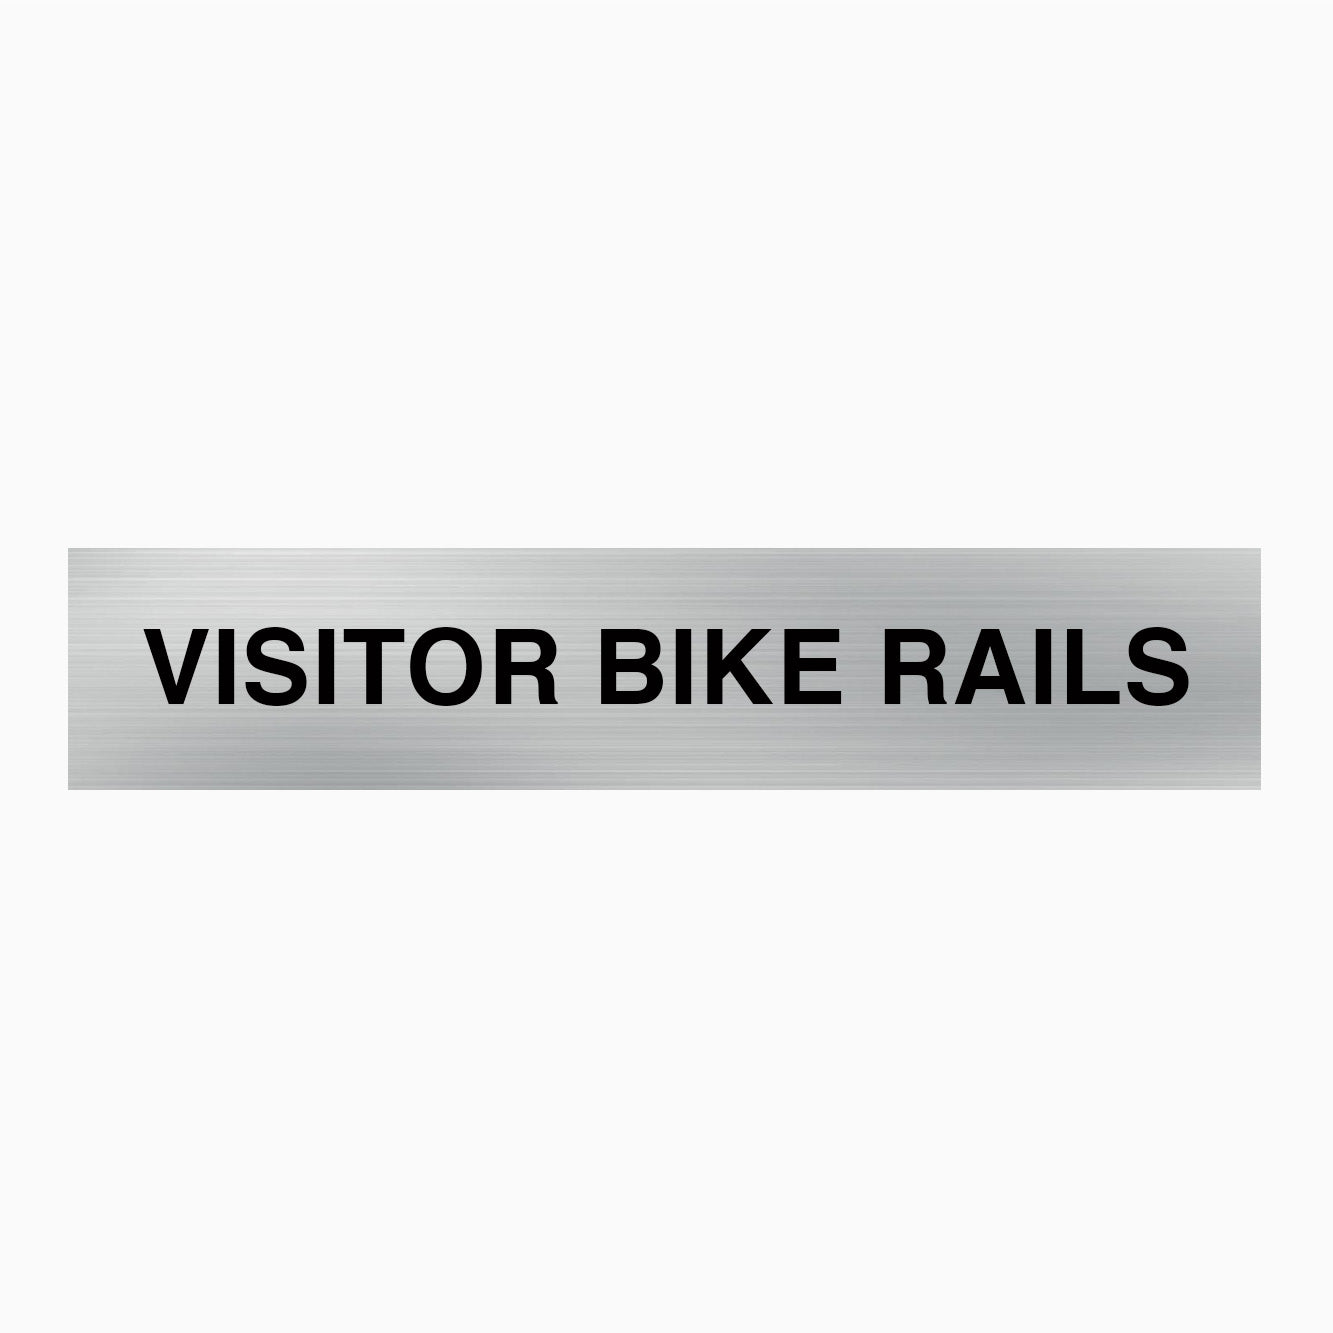 VISITOR BIKE RAILS SIGN - STATUTORY SIGNS AT GET SIGNS